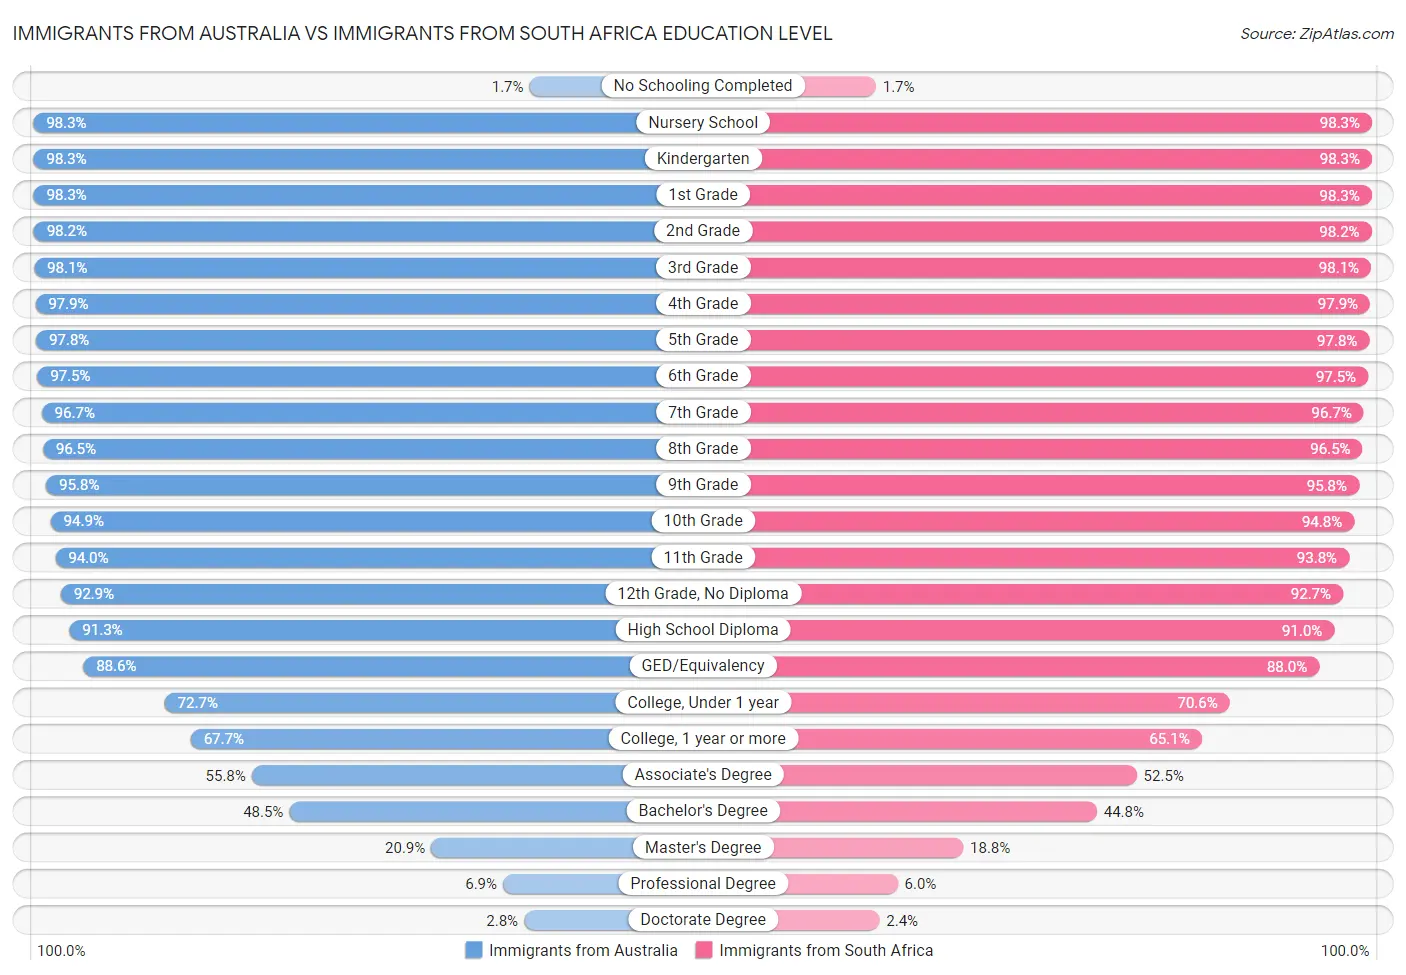 Immigrants from Australia vs Immigrants from South Africa Education Level